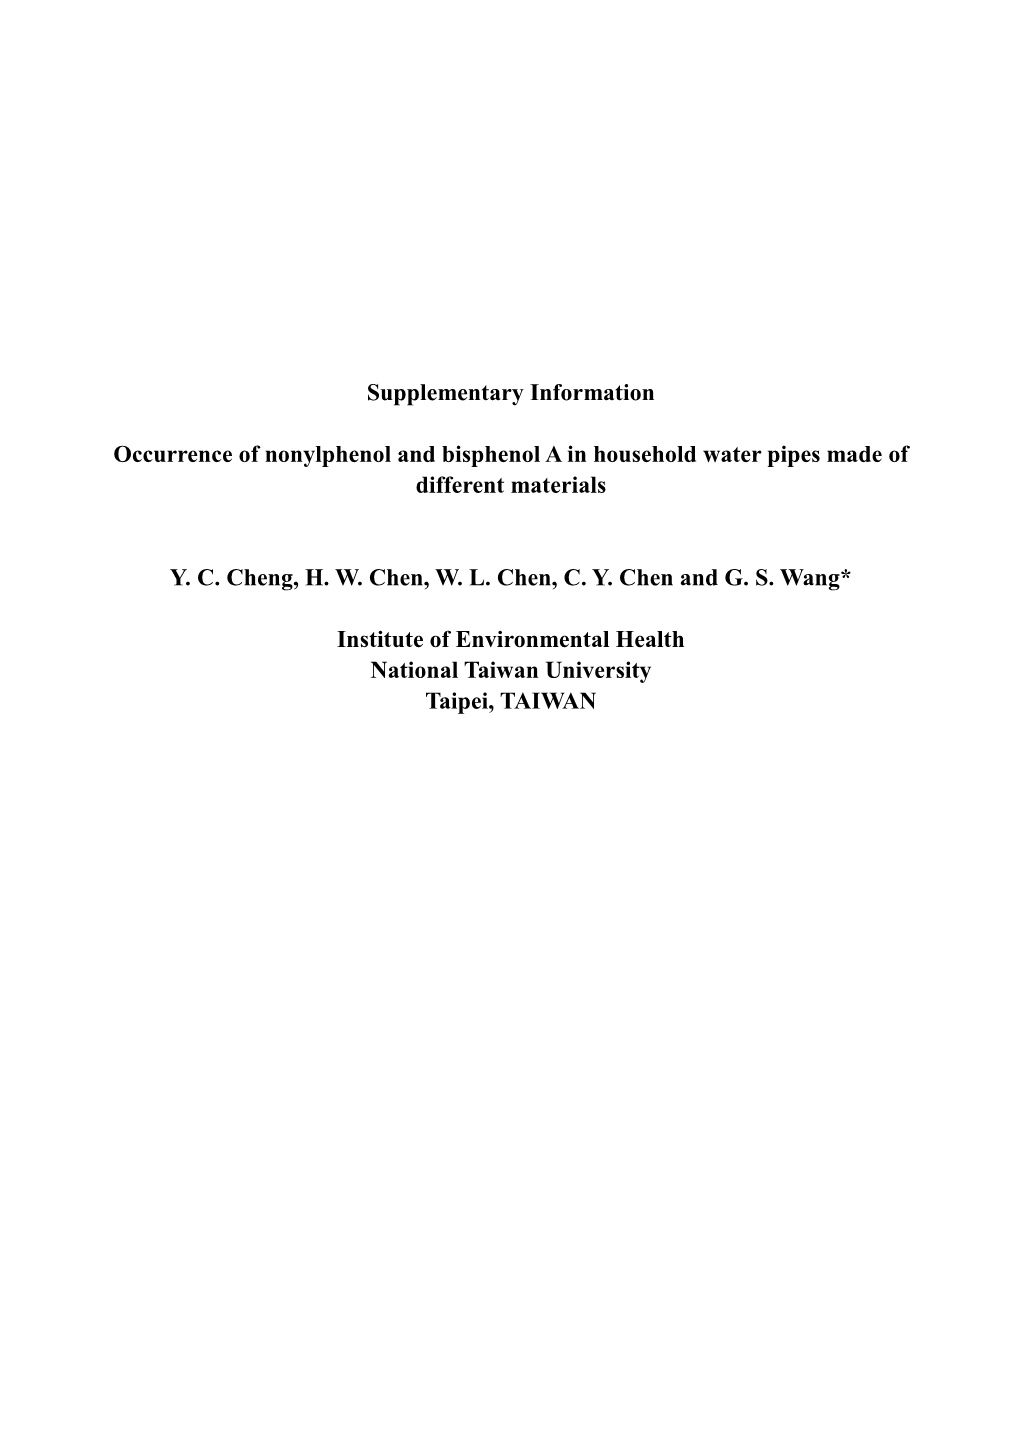 Occurrence of Nonylphenol and Bisphenol a in Household Water Pipes Made of Different Materials